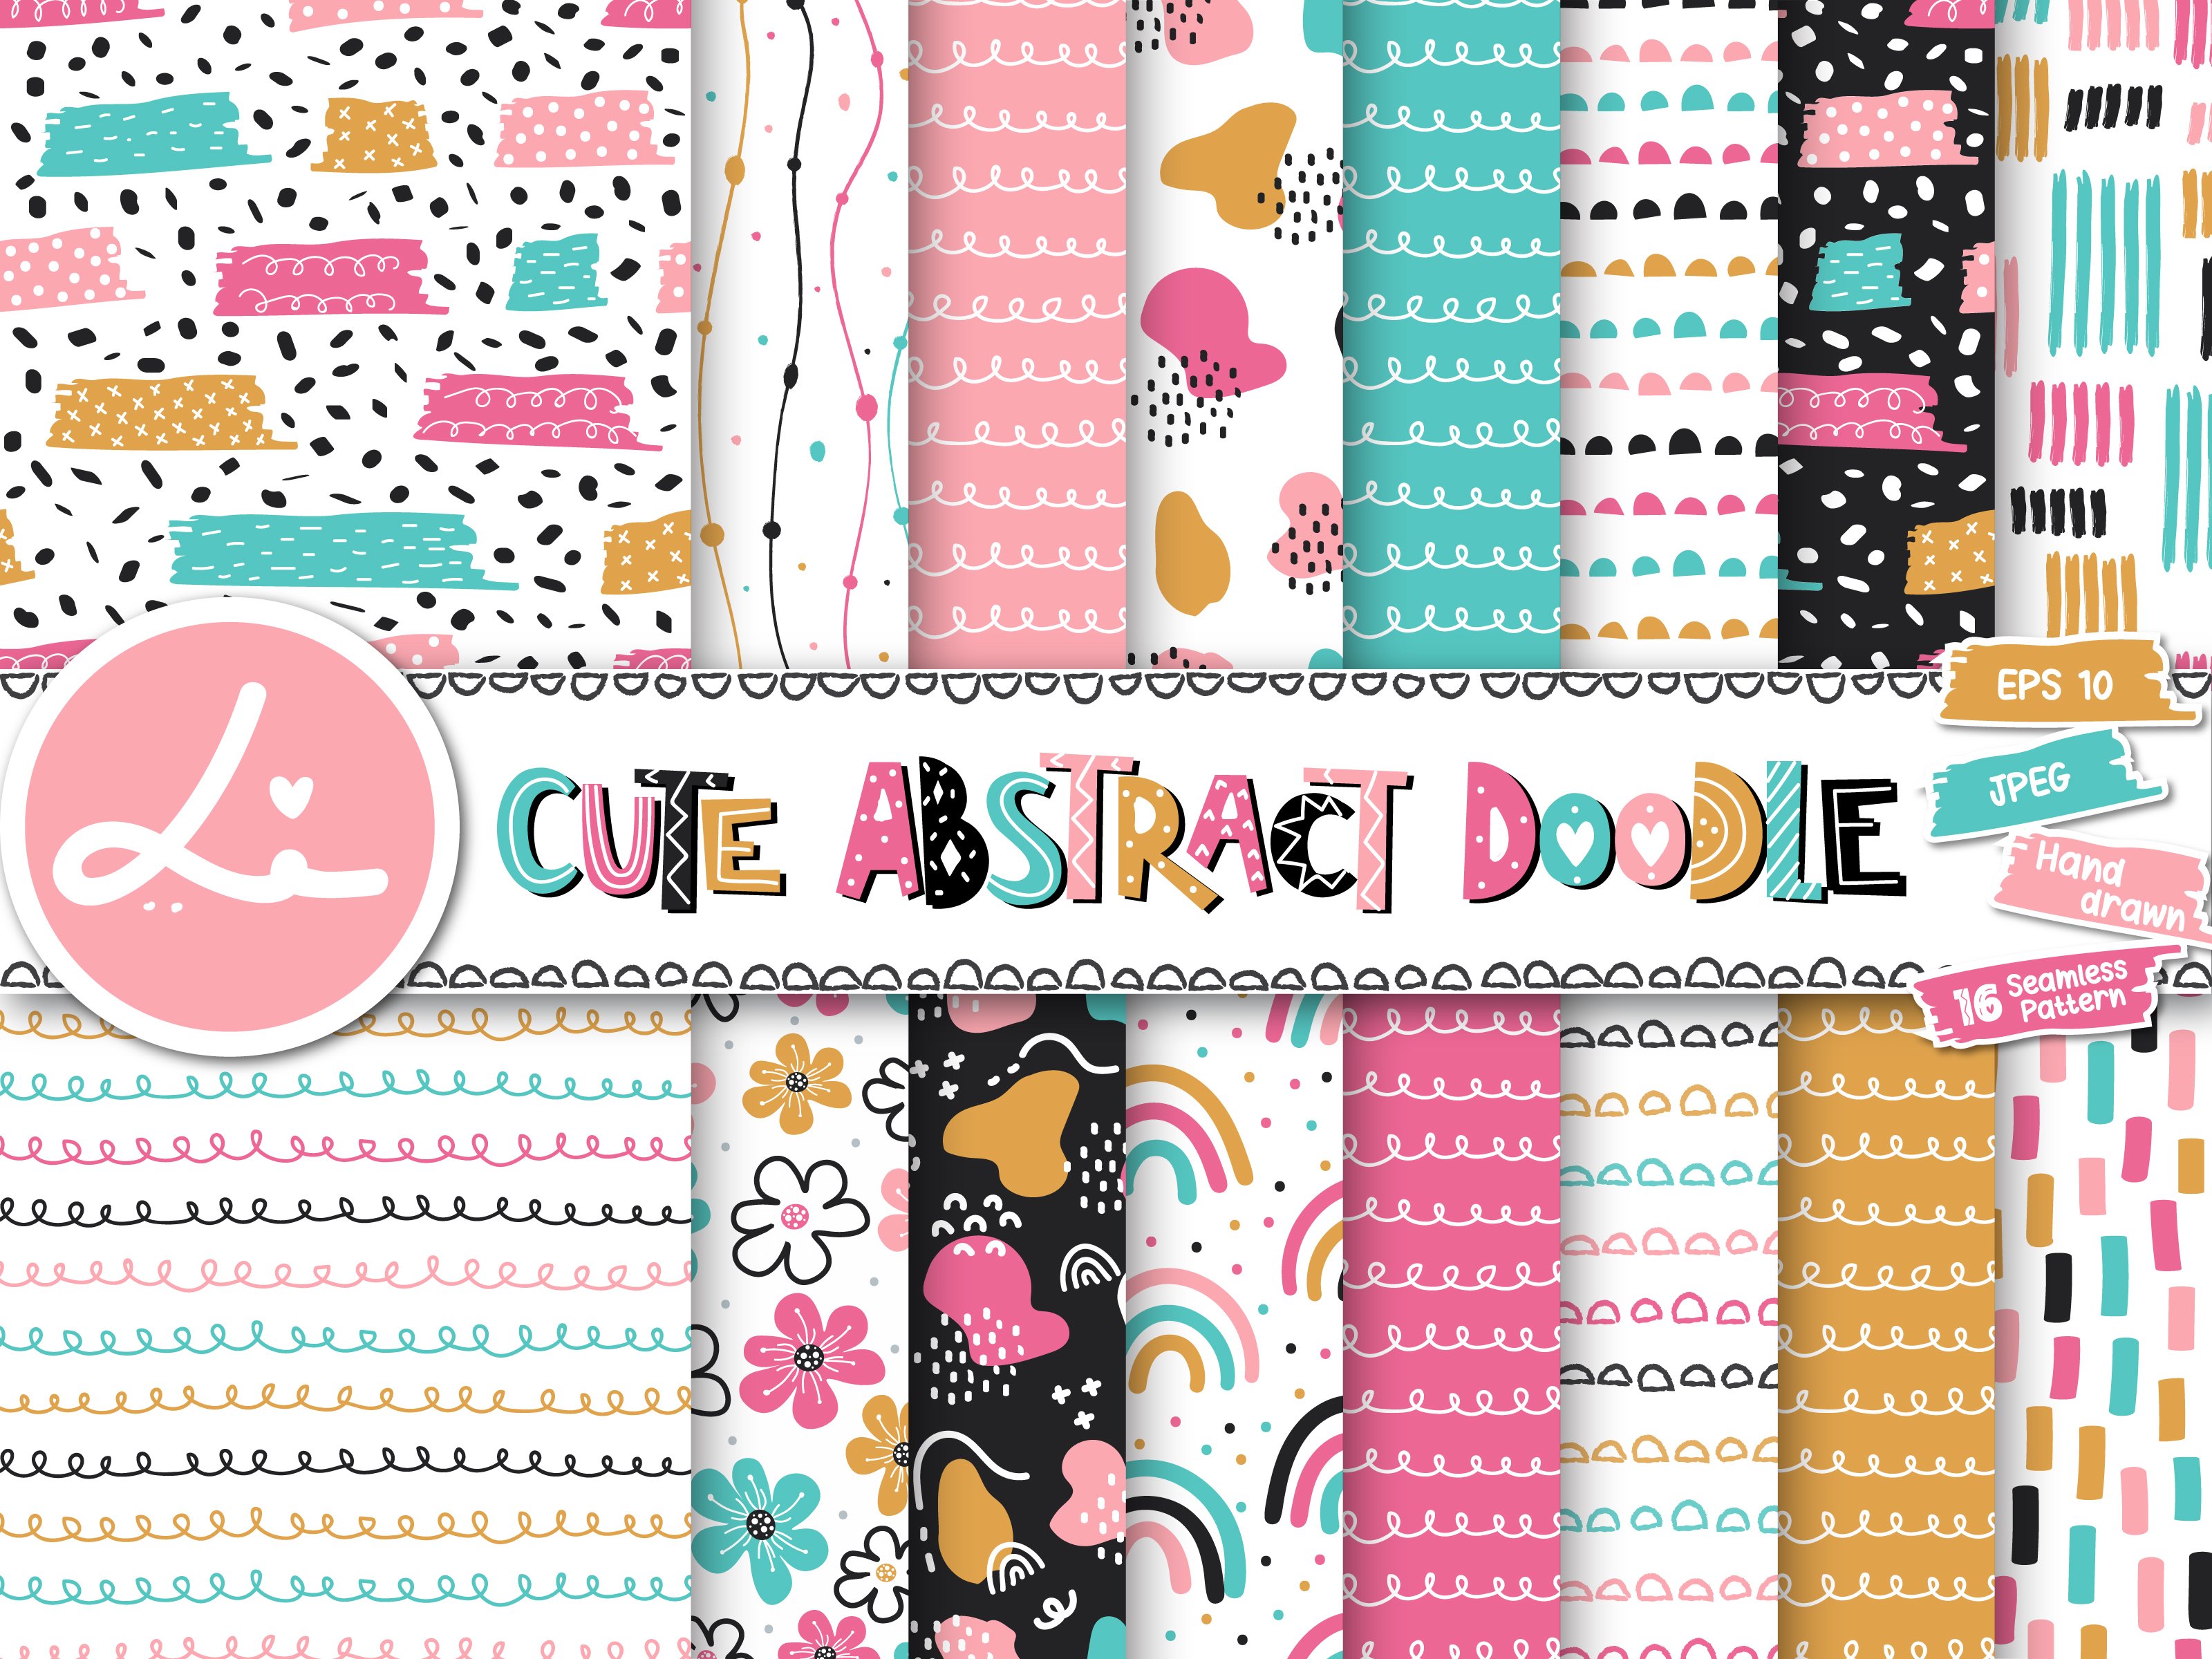 Cute Abstract Doodle Pattern Pack cover image.